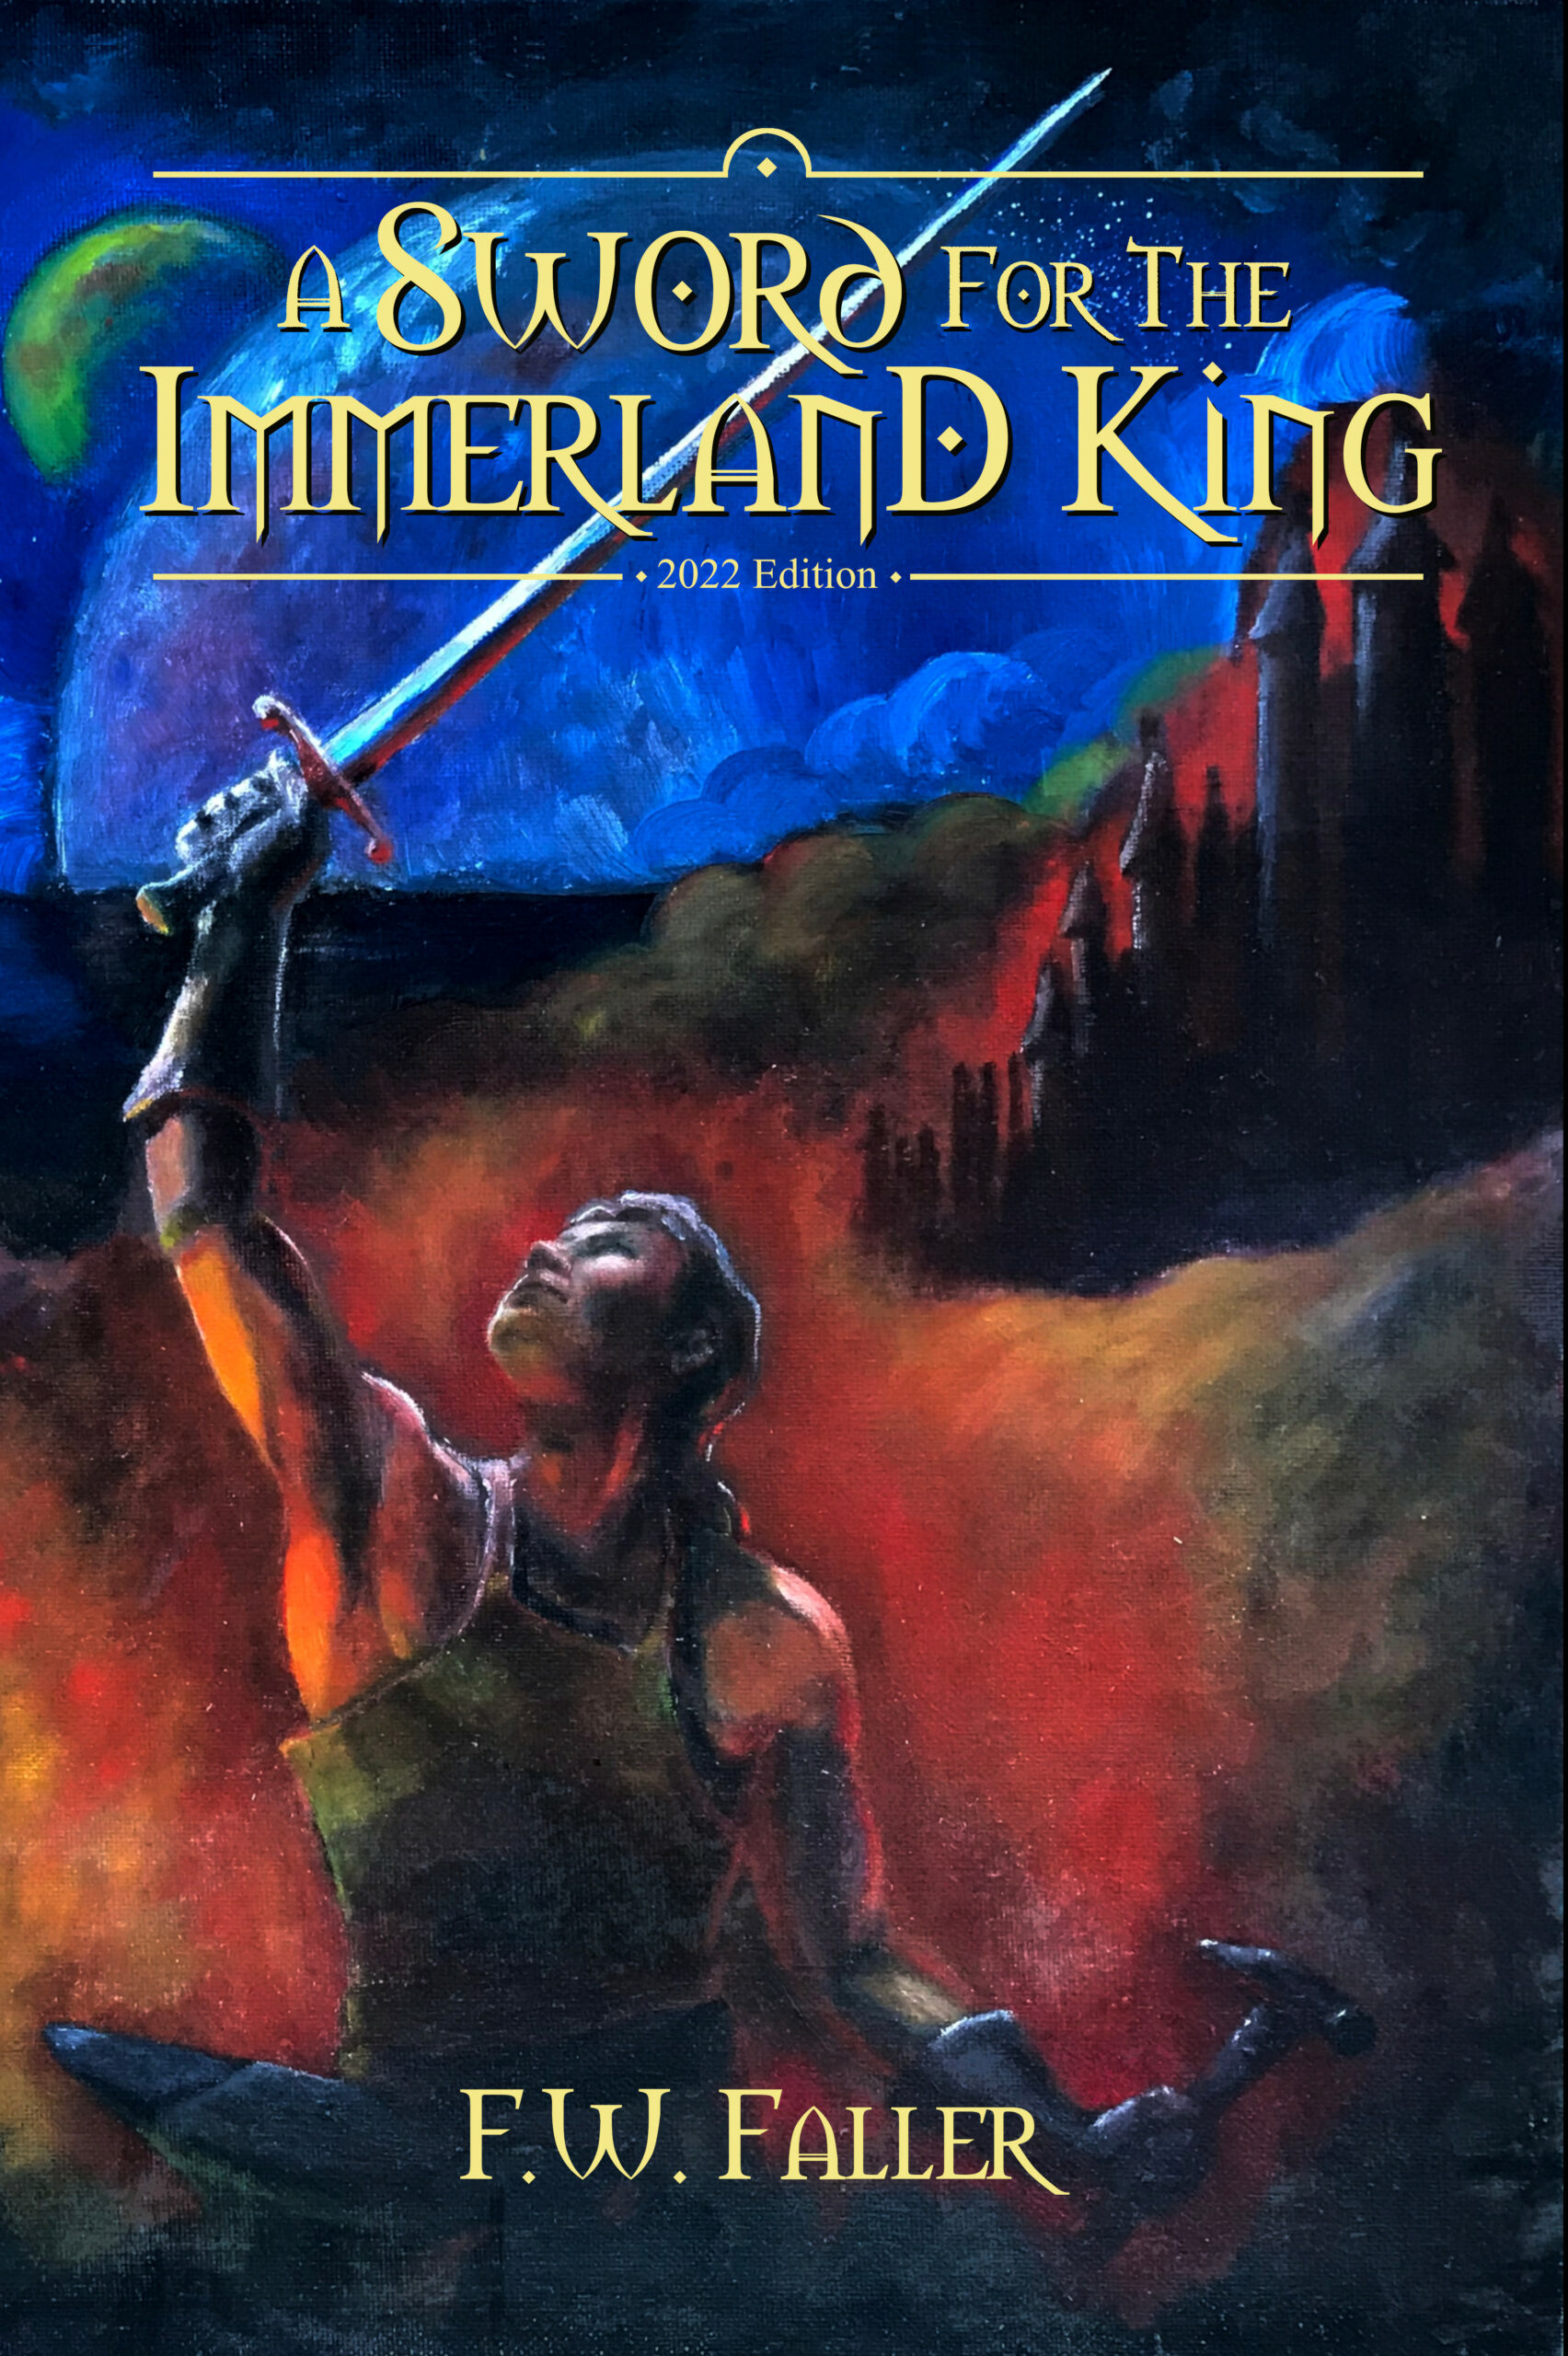 A Sword for the Immerland King, F. W. Faller